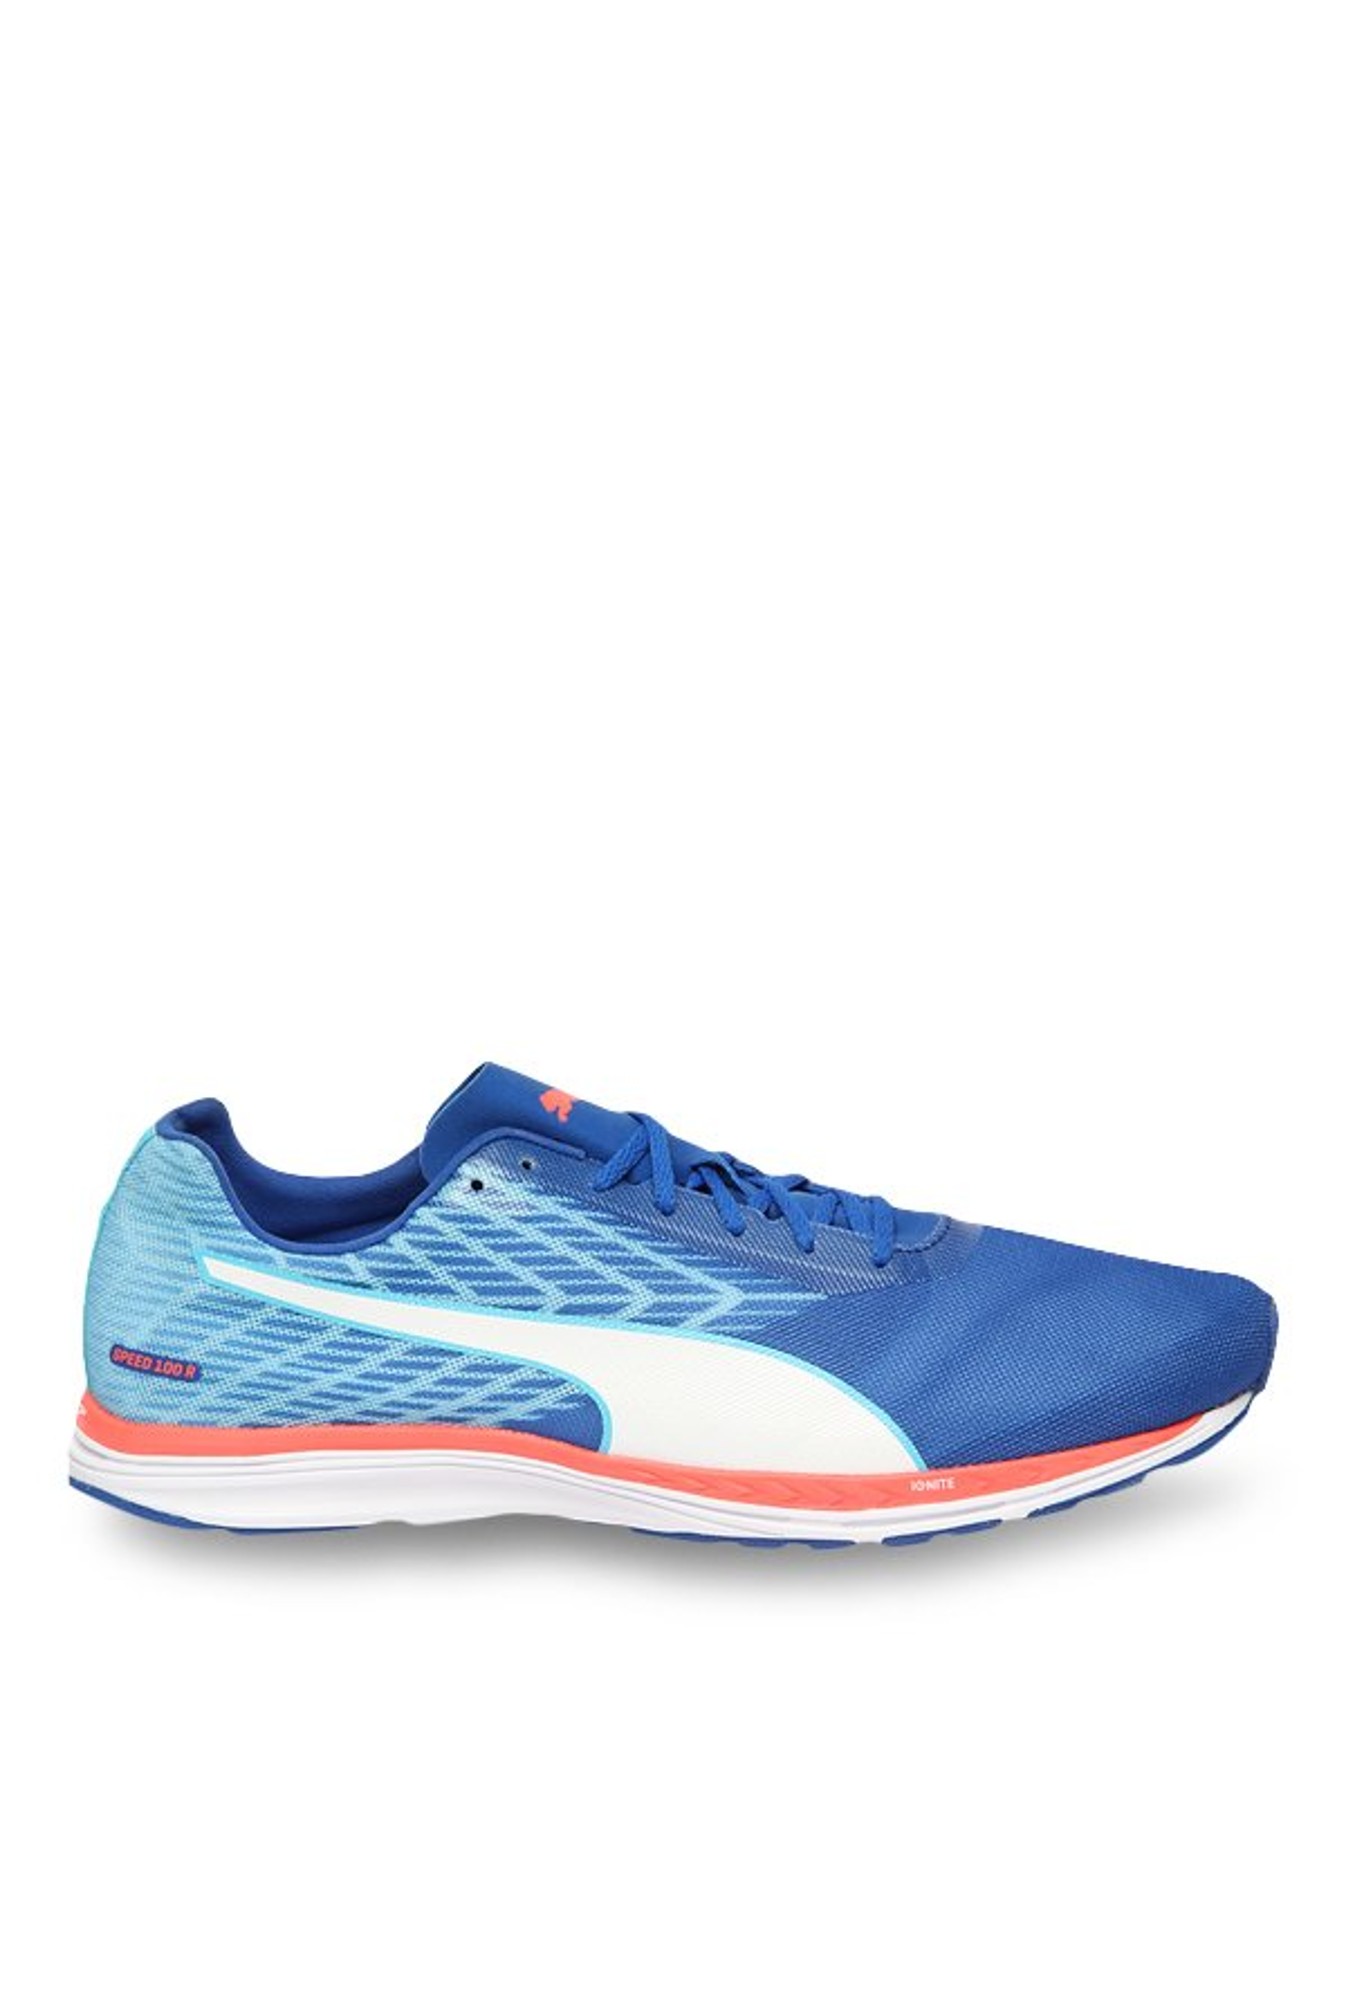 Puma Men's Ignite Speed 100 R Lapis Blue & Turquoise Running Shoes from top Brands at Best Prices Online in India | Tata CLiQ